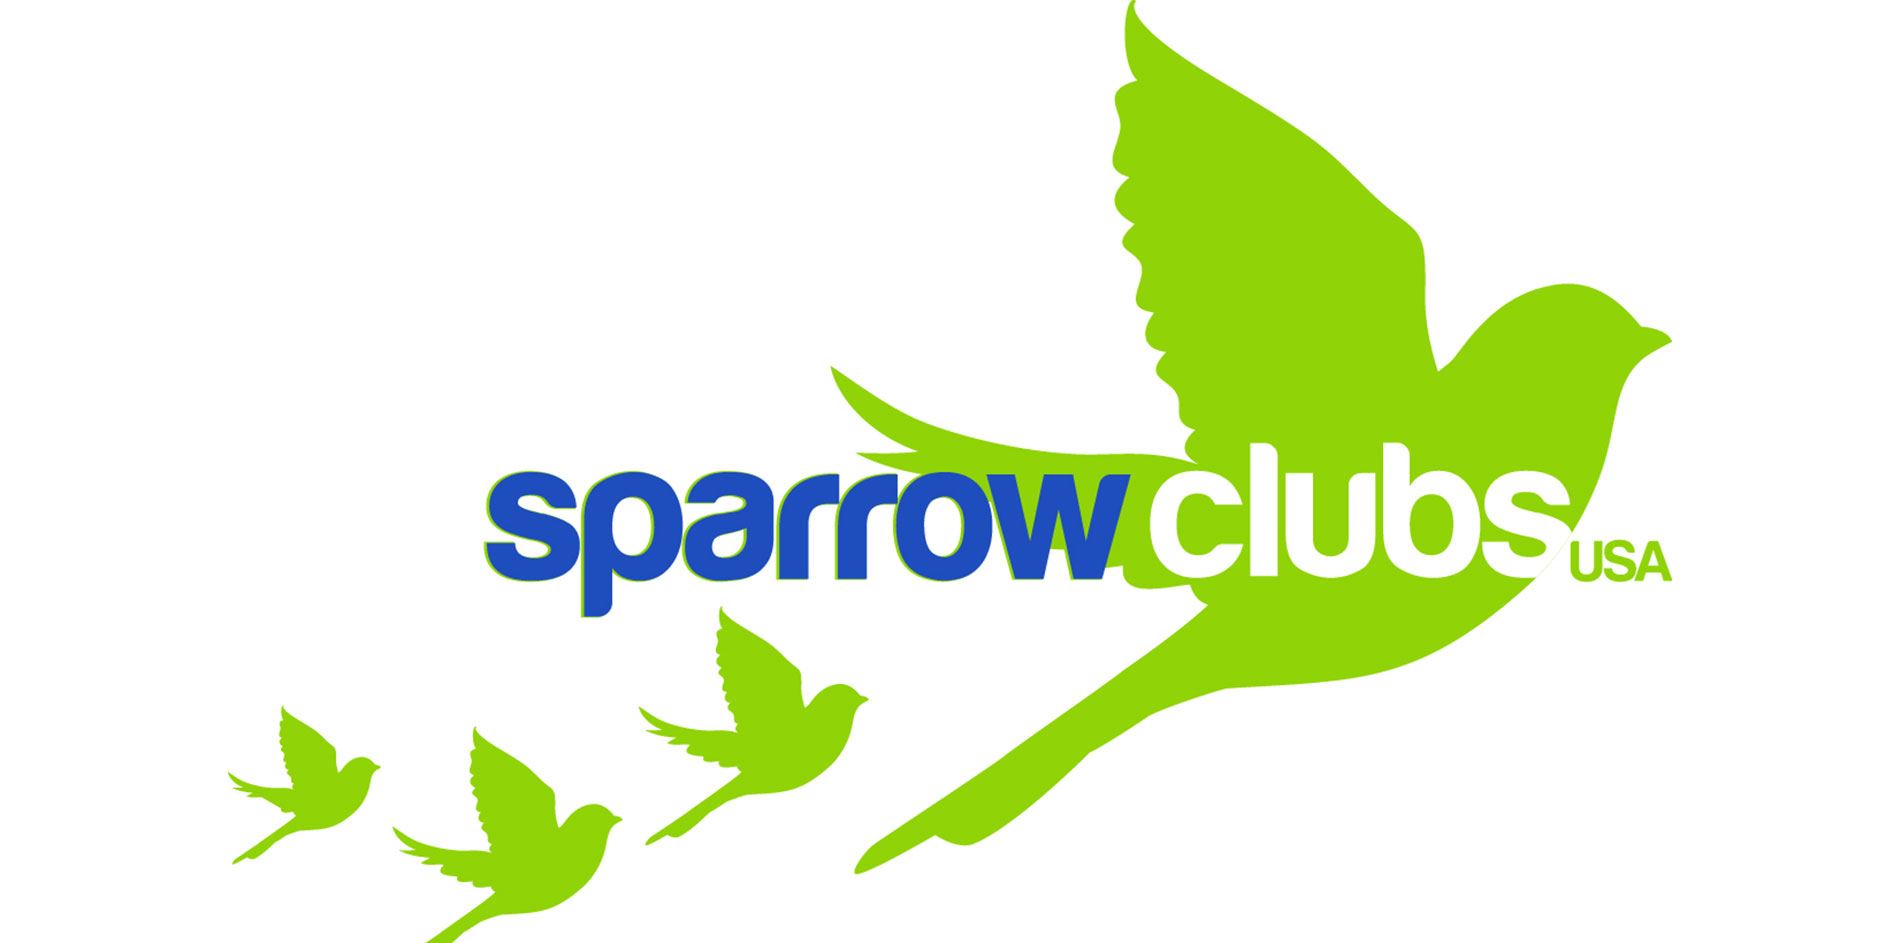 Tetherow Partners With Summit High School To Sponsor a Sparrow Child